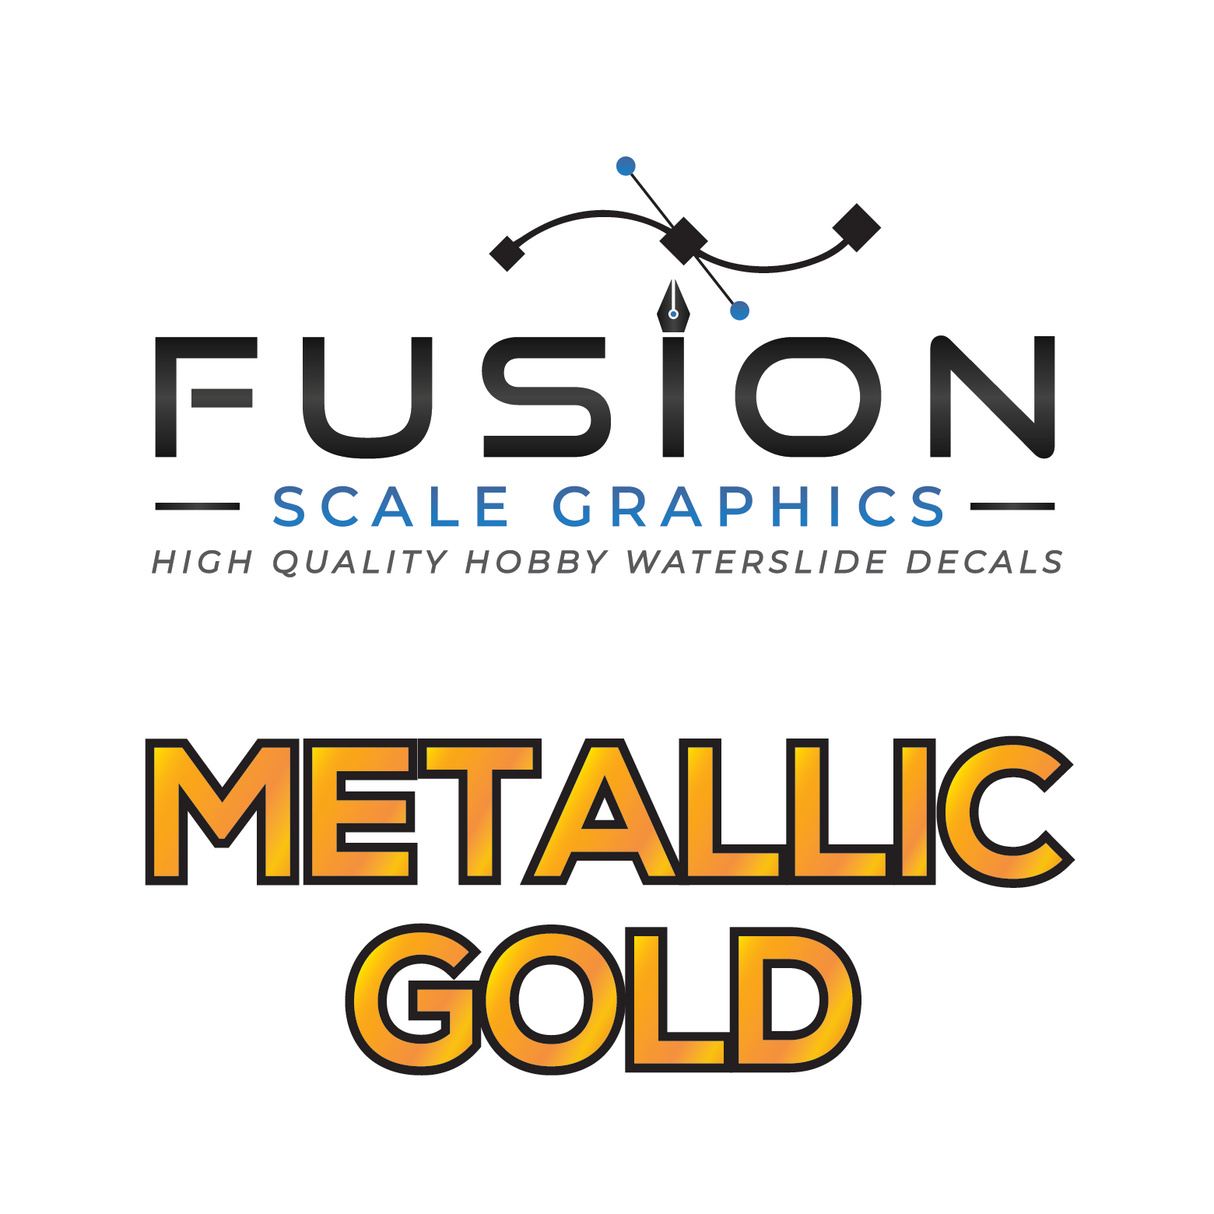 Fusion Scale Graphics Custom Metallic Gold Waterslide Decal Printing Full Sheet A4